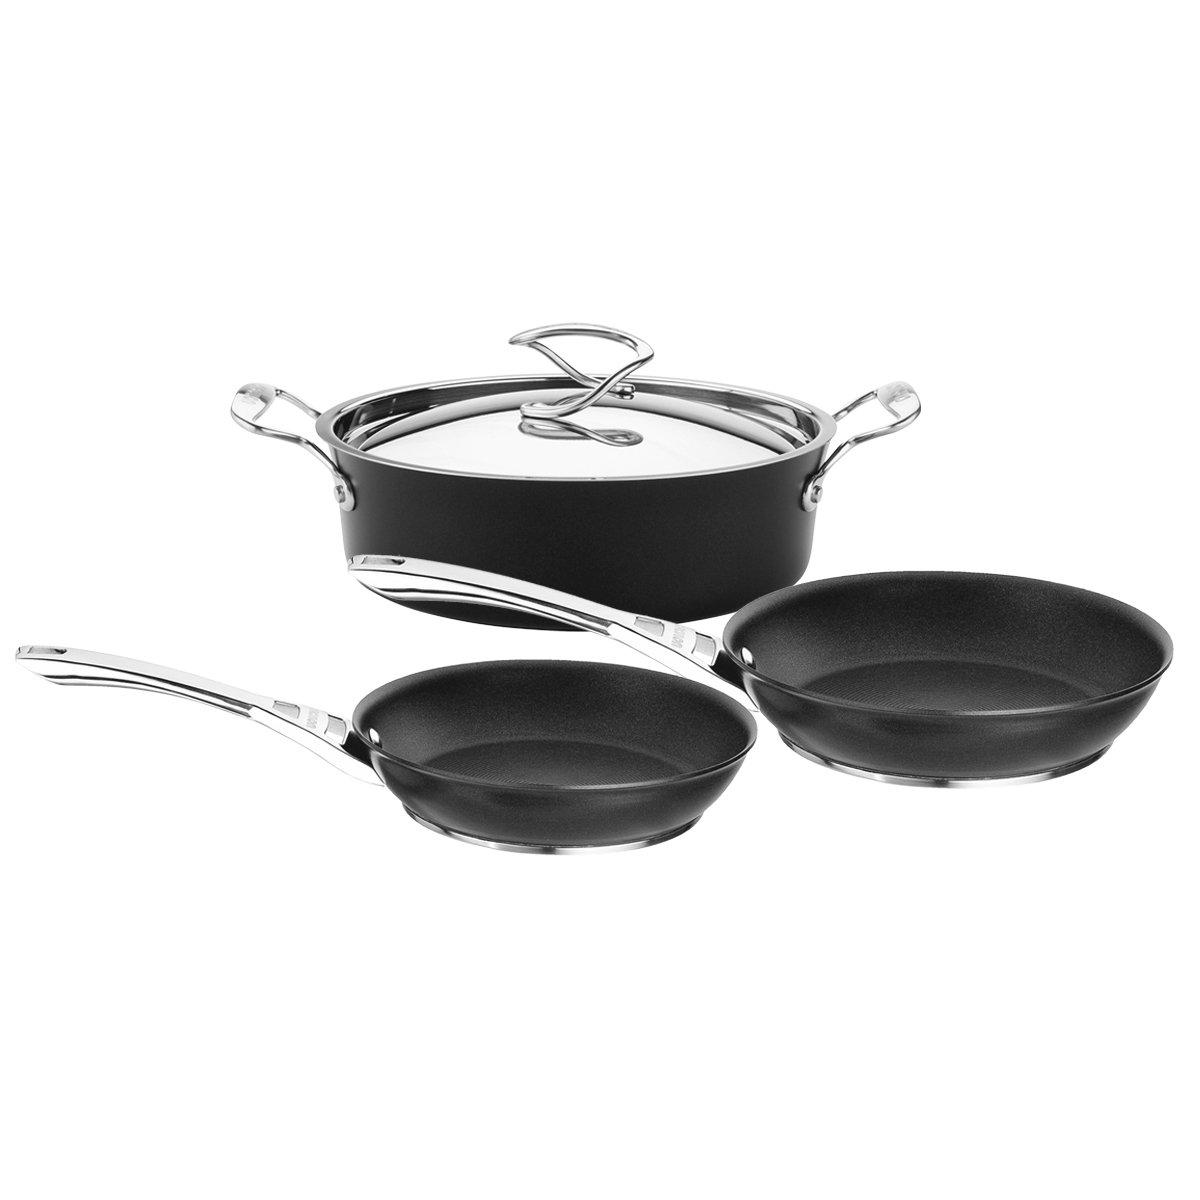 Style Hard Anodized Pan Set - Dishwasher Safe Cookware - Pack of 3